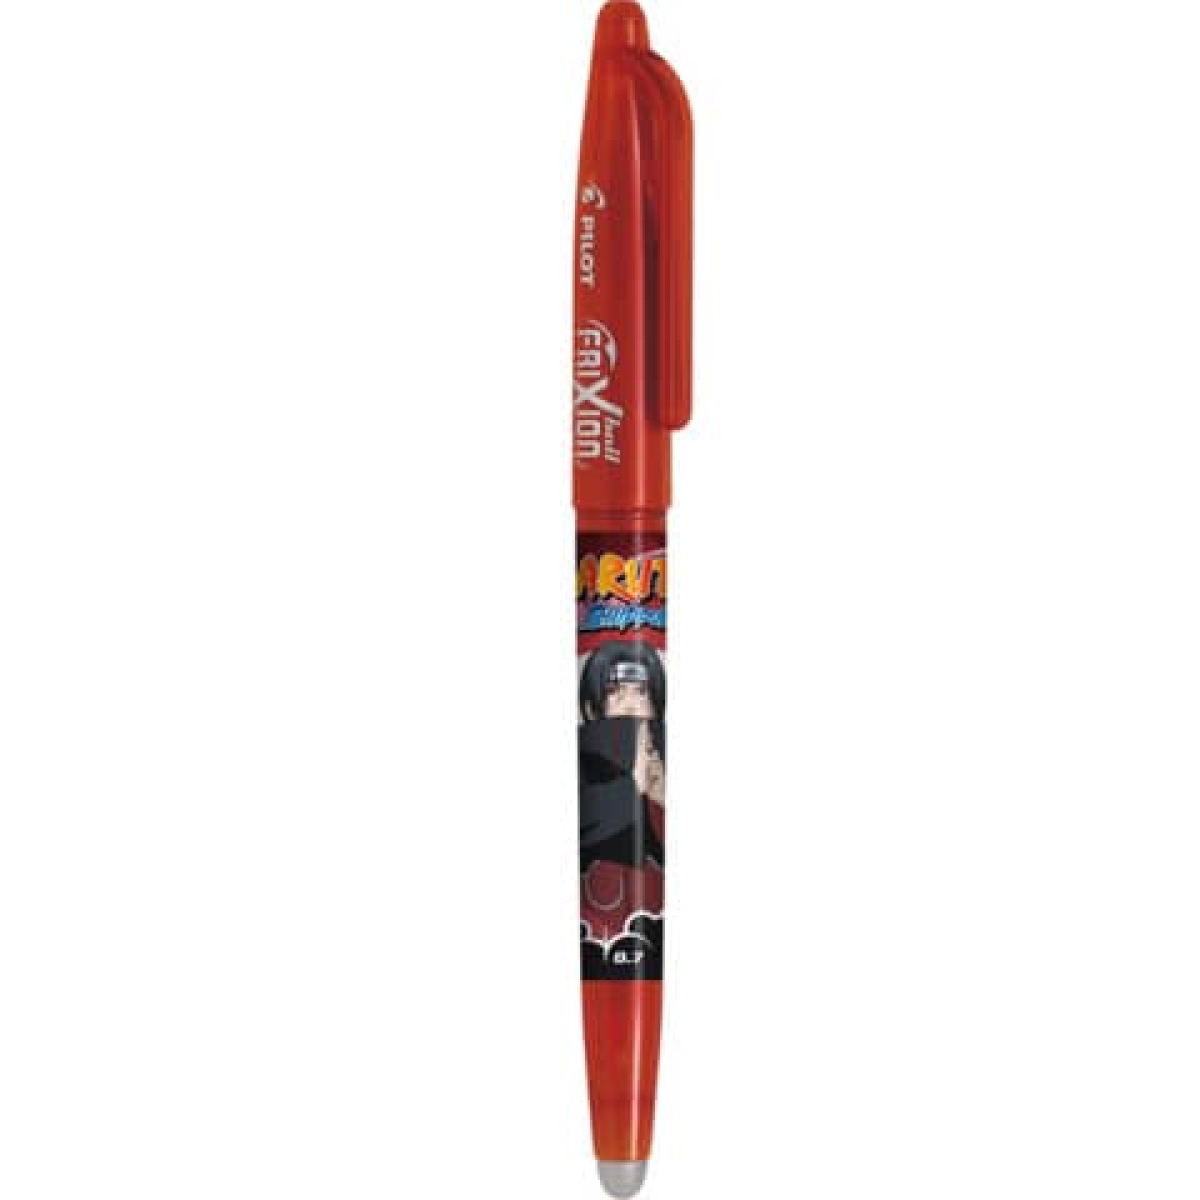 PILOTFriXion Ball Naruto rollerball pen, 0.4mm, red 2260002NRArticle-No: 4902505667718